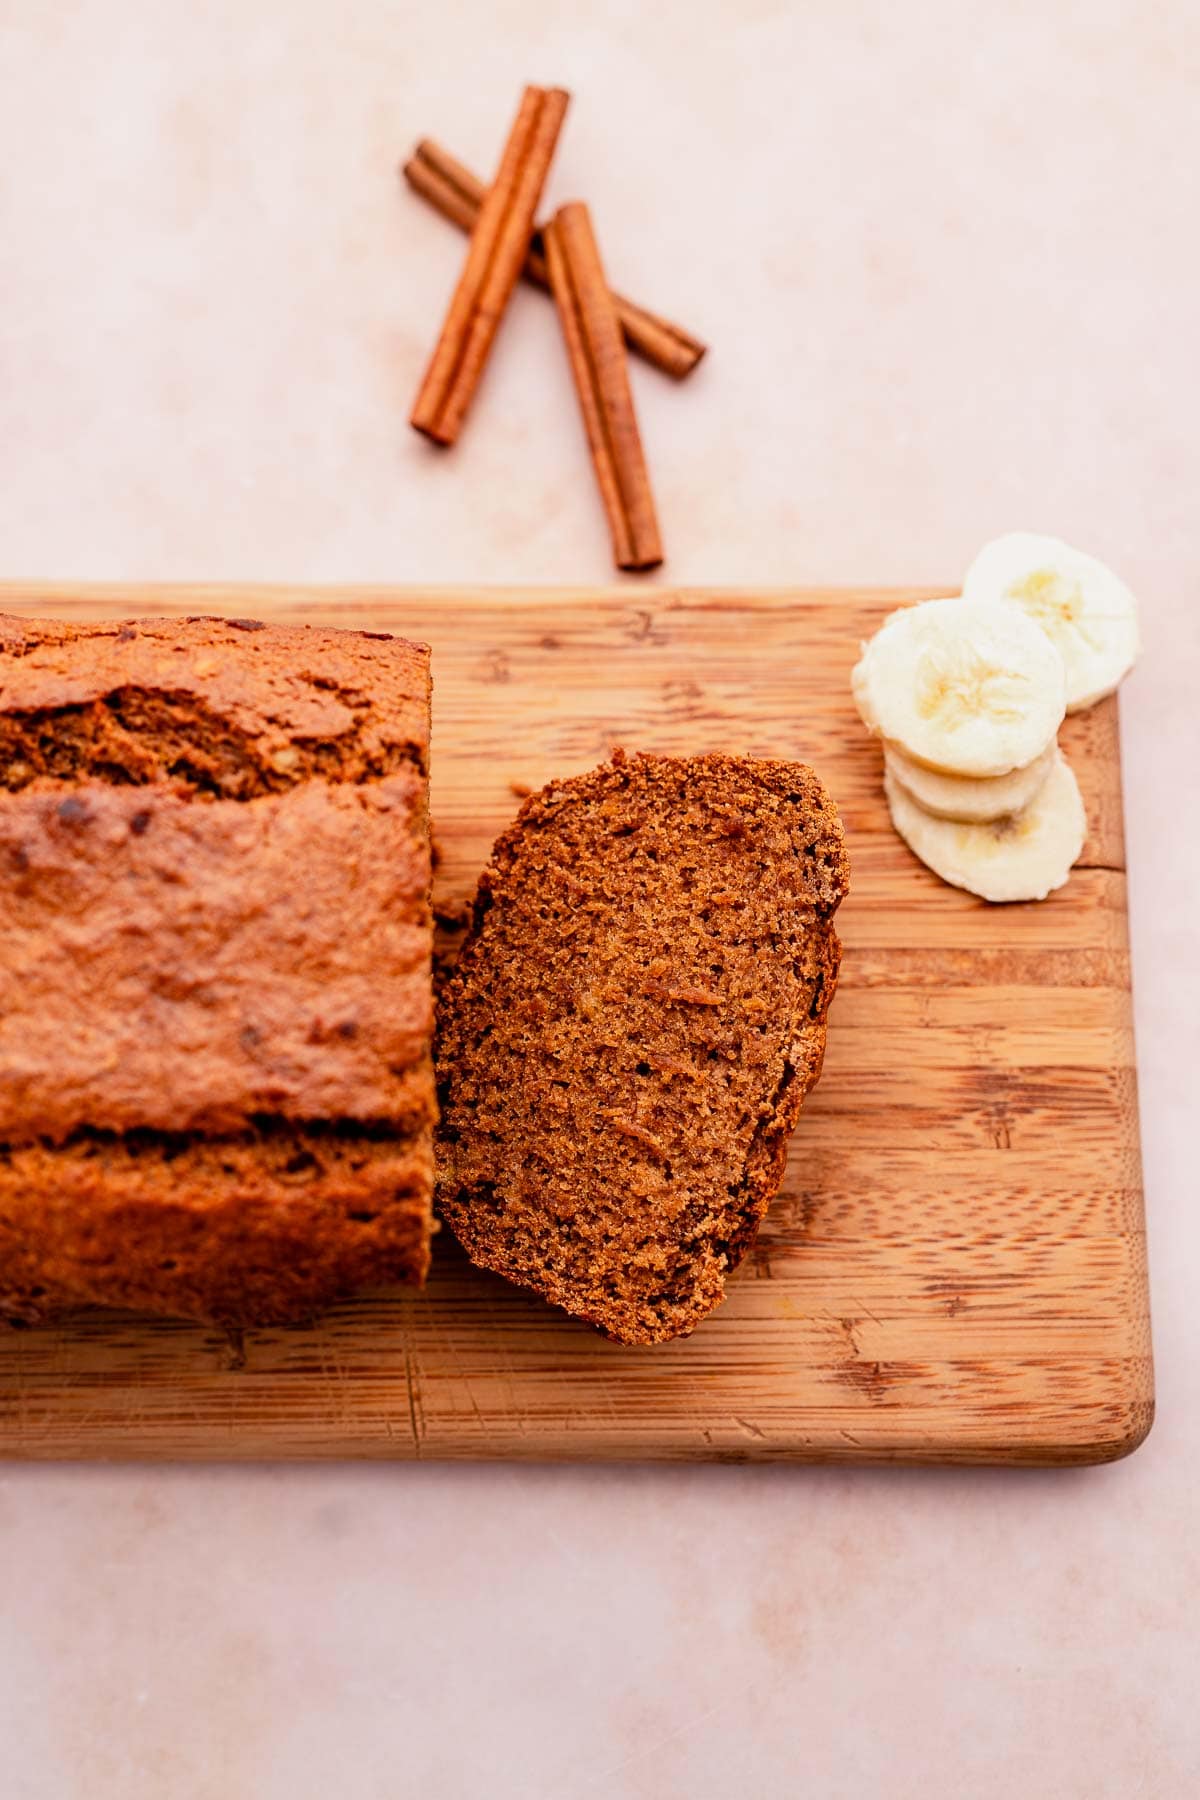 A delicious slice of oat flour banana bread is delicately placed on a rustic wooden cutting board.